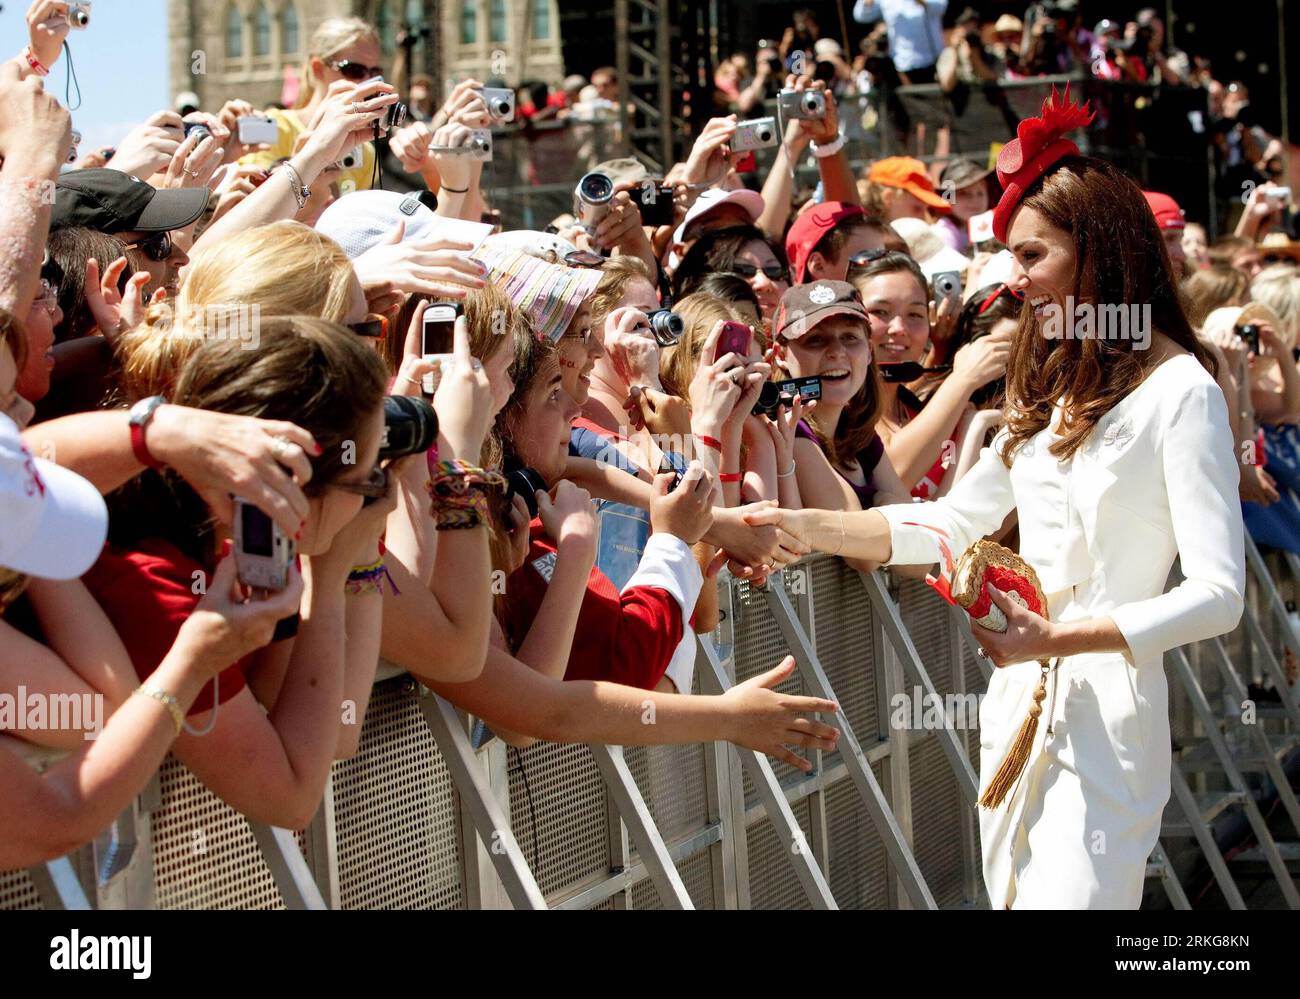 Bildnummer: 55565302  Datum: 01.07.2011  Copyright: imago/Xinhua (110702)-- OTTAWA, July 2, 2011 (Xinhua) -- Prince William s wife Kate, Britain s Duchess of Cambridge, shakes hands with during the 144th Canada Day celebrations on Parliament Hill in Ottawa, Canada, on July 1, 2011. The Royal couple is on a nine-day official visit to Canada, their first overseas trip since being married.(Xinhua/Jason Ransom)(zl) CANADA-CANADA DAY-CELEBRATION PUBLICATIONxNOTxINxCHN People Entertainment Adel GBR Königshaus Kate xda x0x premiumd Middleton 2011 quer  Catherine    Bildnummer 55565302 Date 01 07 2011 Stock Photo